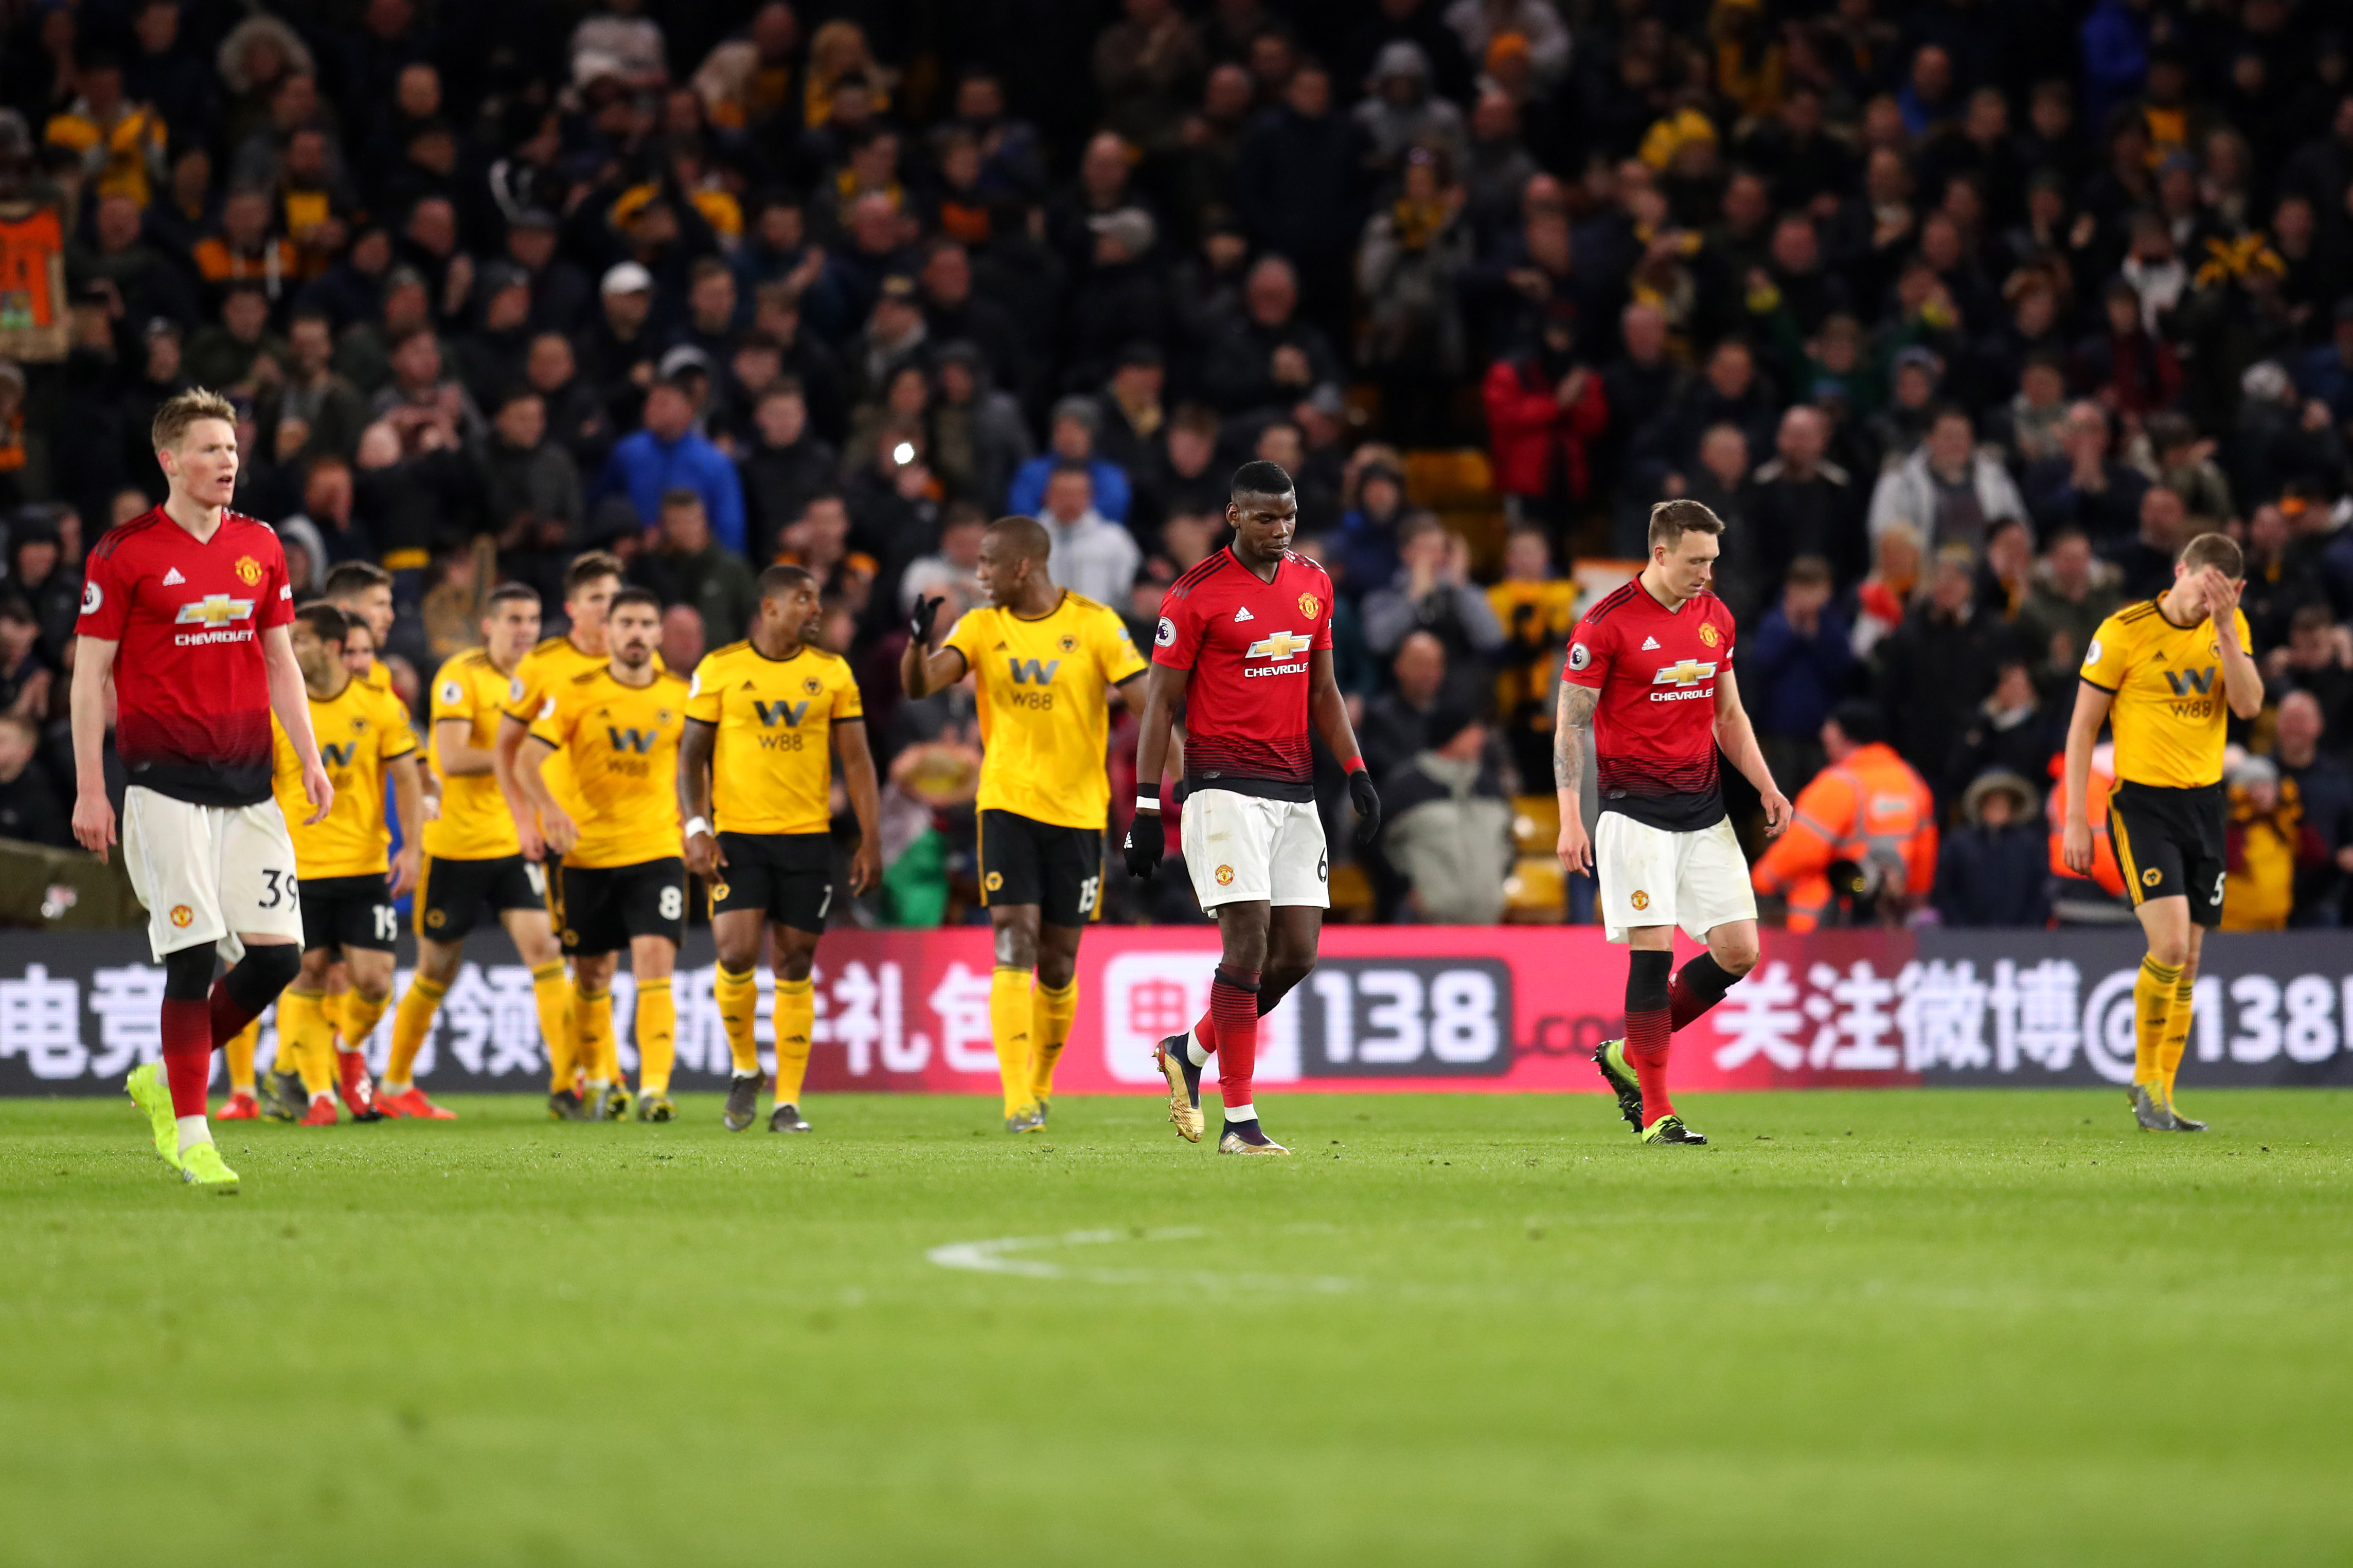 WOLVERHAMPTON, ENGLAND - APRIL 02:  Paul Pogba of Manchester United looks dejected after Wolverhampton Wanderers' second goal during the Premier League match between Wolverhampton Wanderers and Manchester United at Molineux on April 02, 2019 in Wolverhampton, United Kingdom. (Photo by Catherine Ivill/Getty Images)